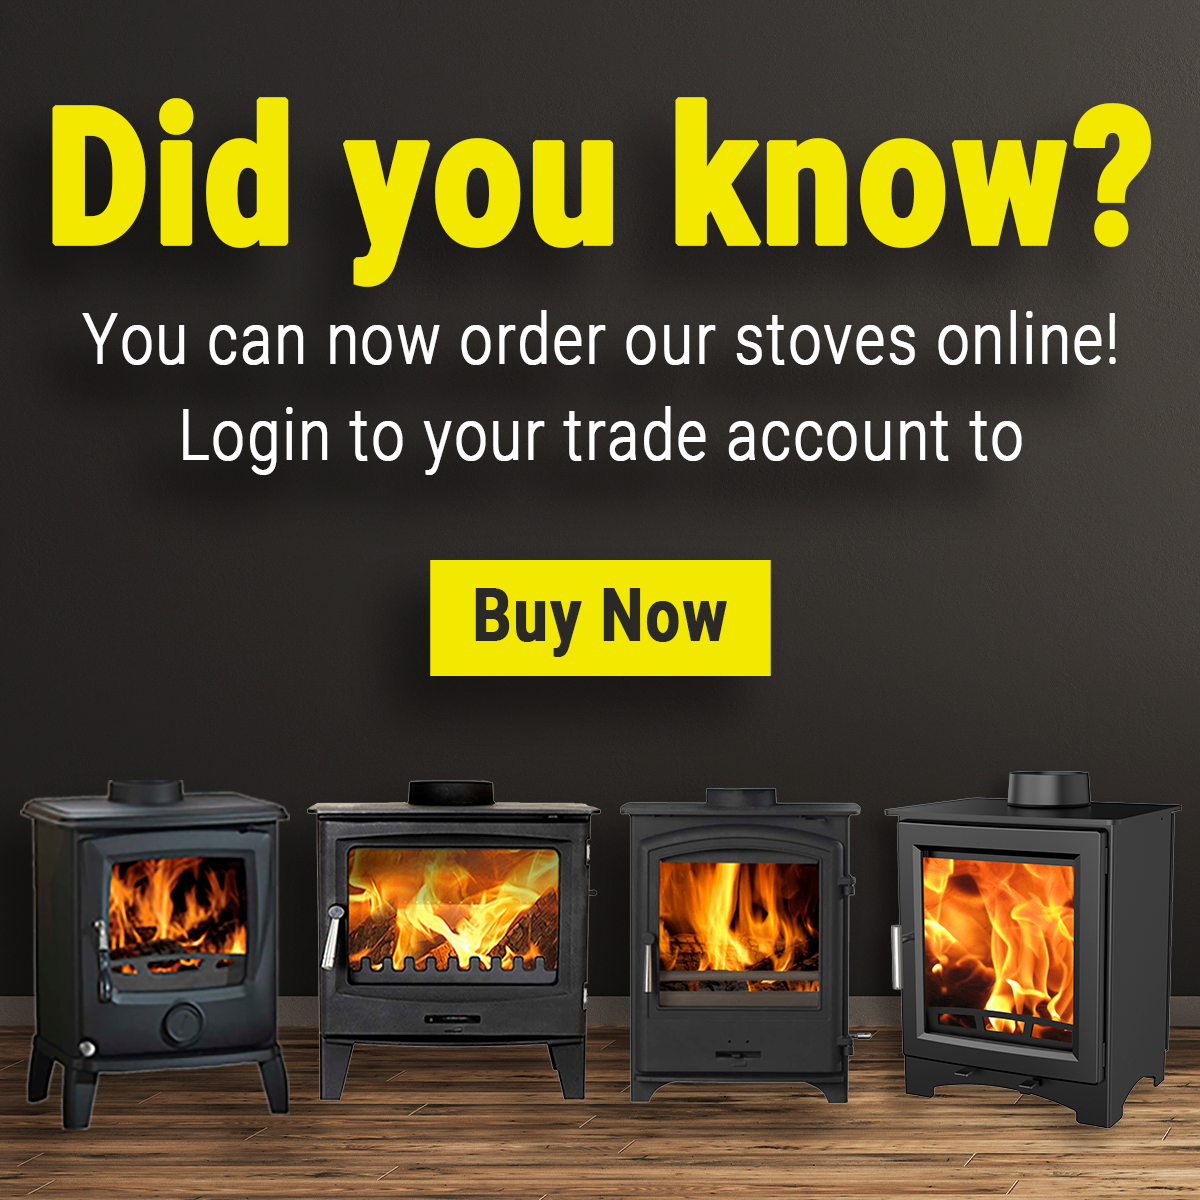 Login to you trade account to buy now